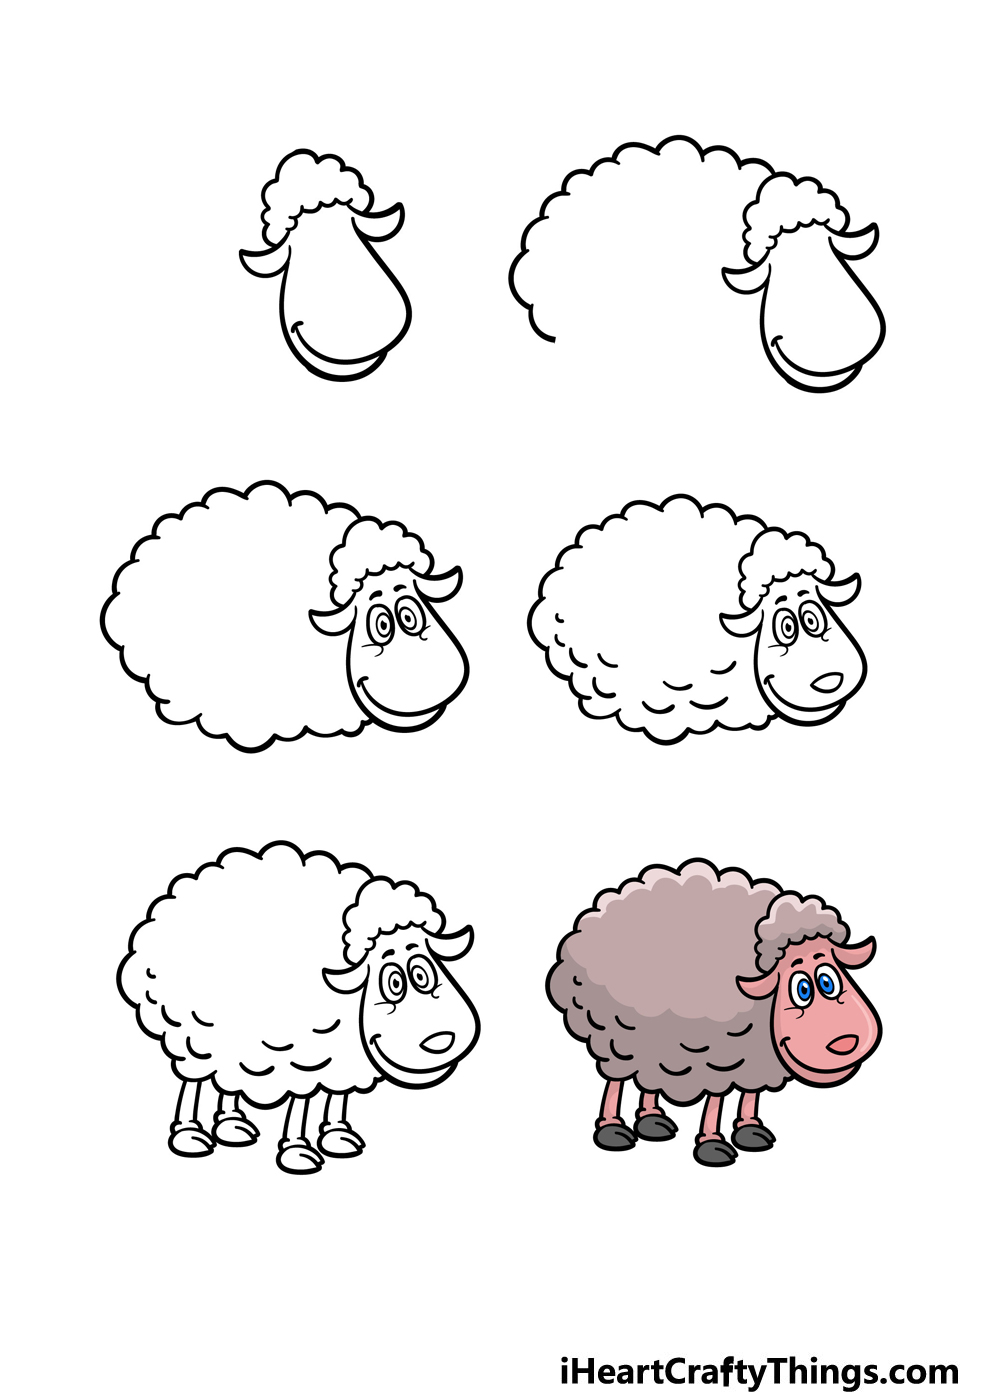 how to draw a cartoon sheep in 6 steps